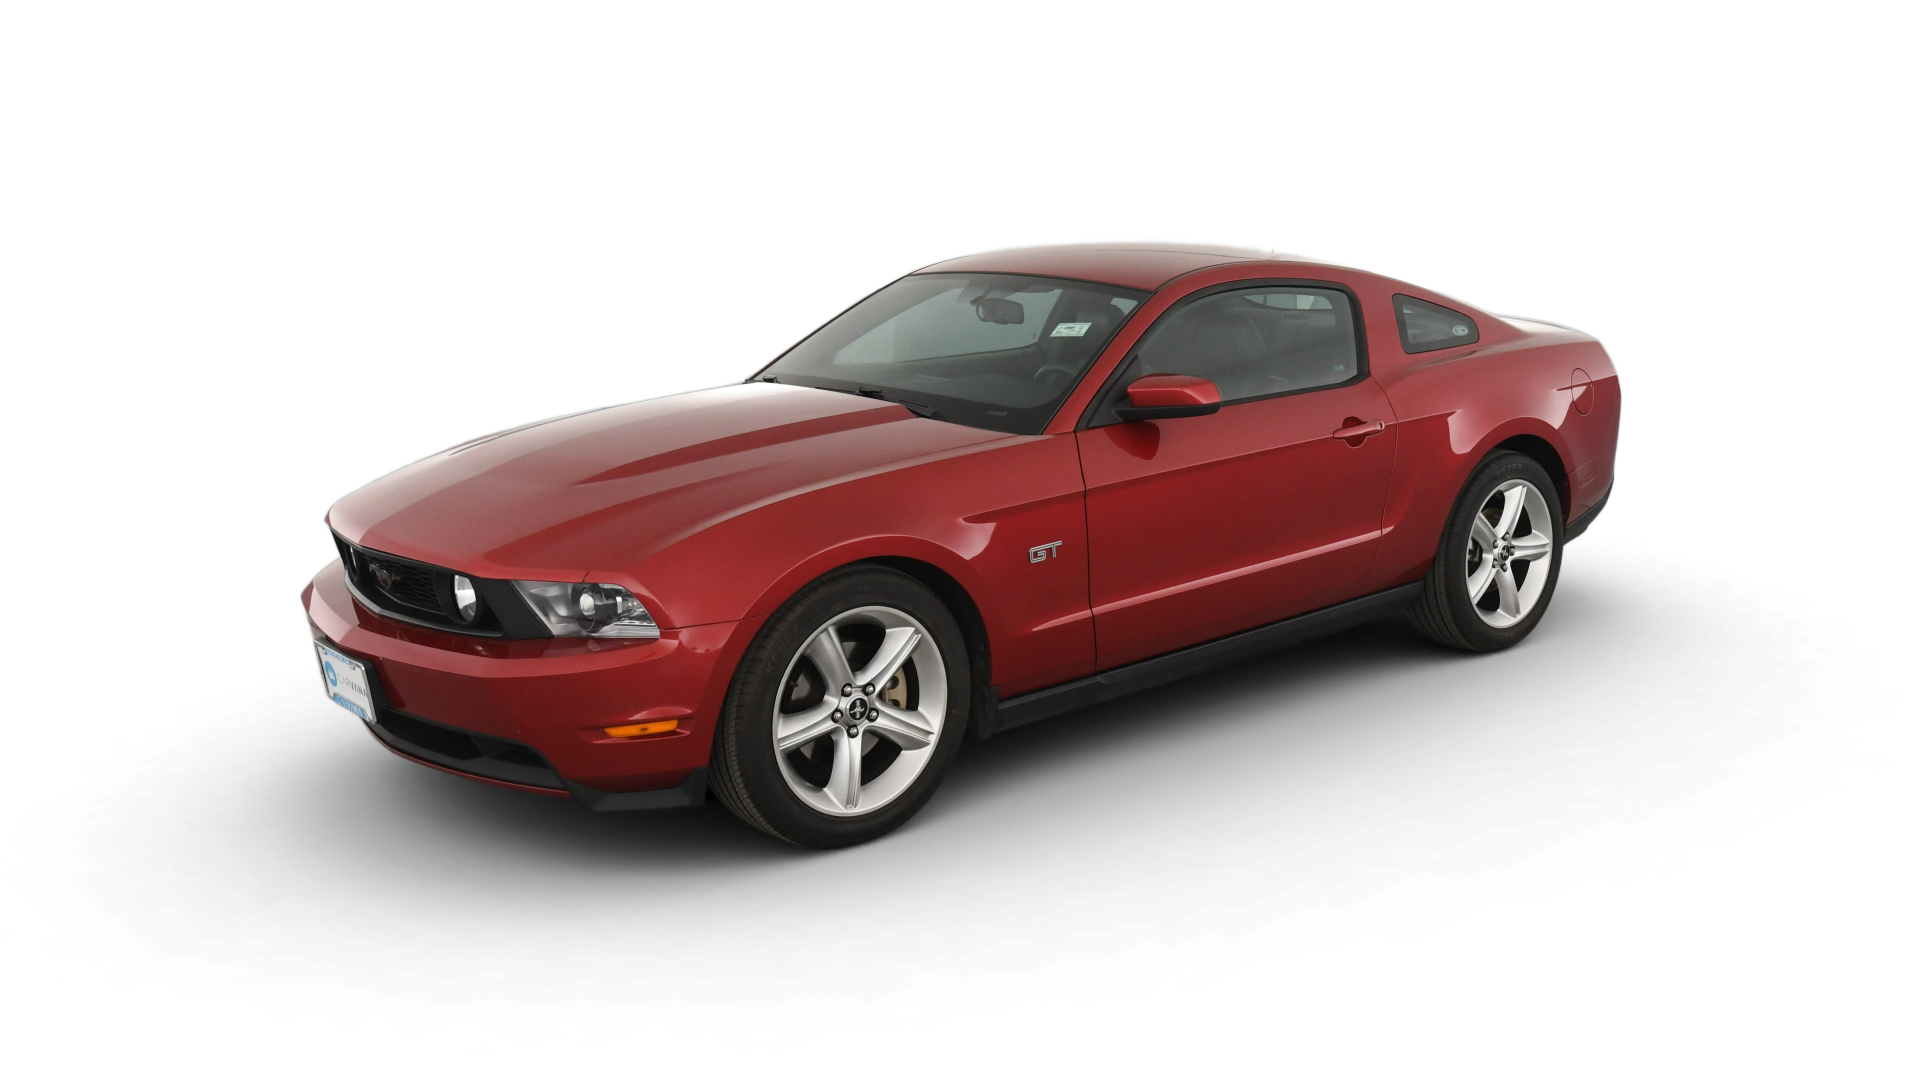 Used 2010 Ford Mustang For Sale Online | Carvana